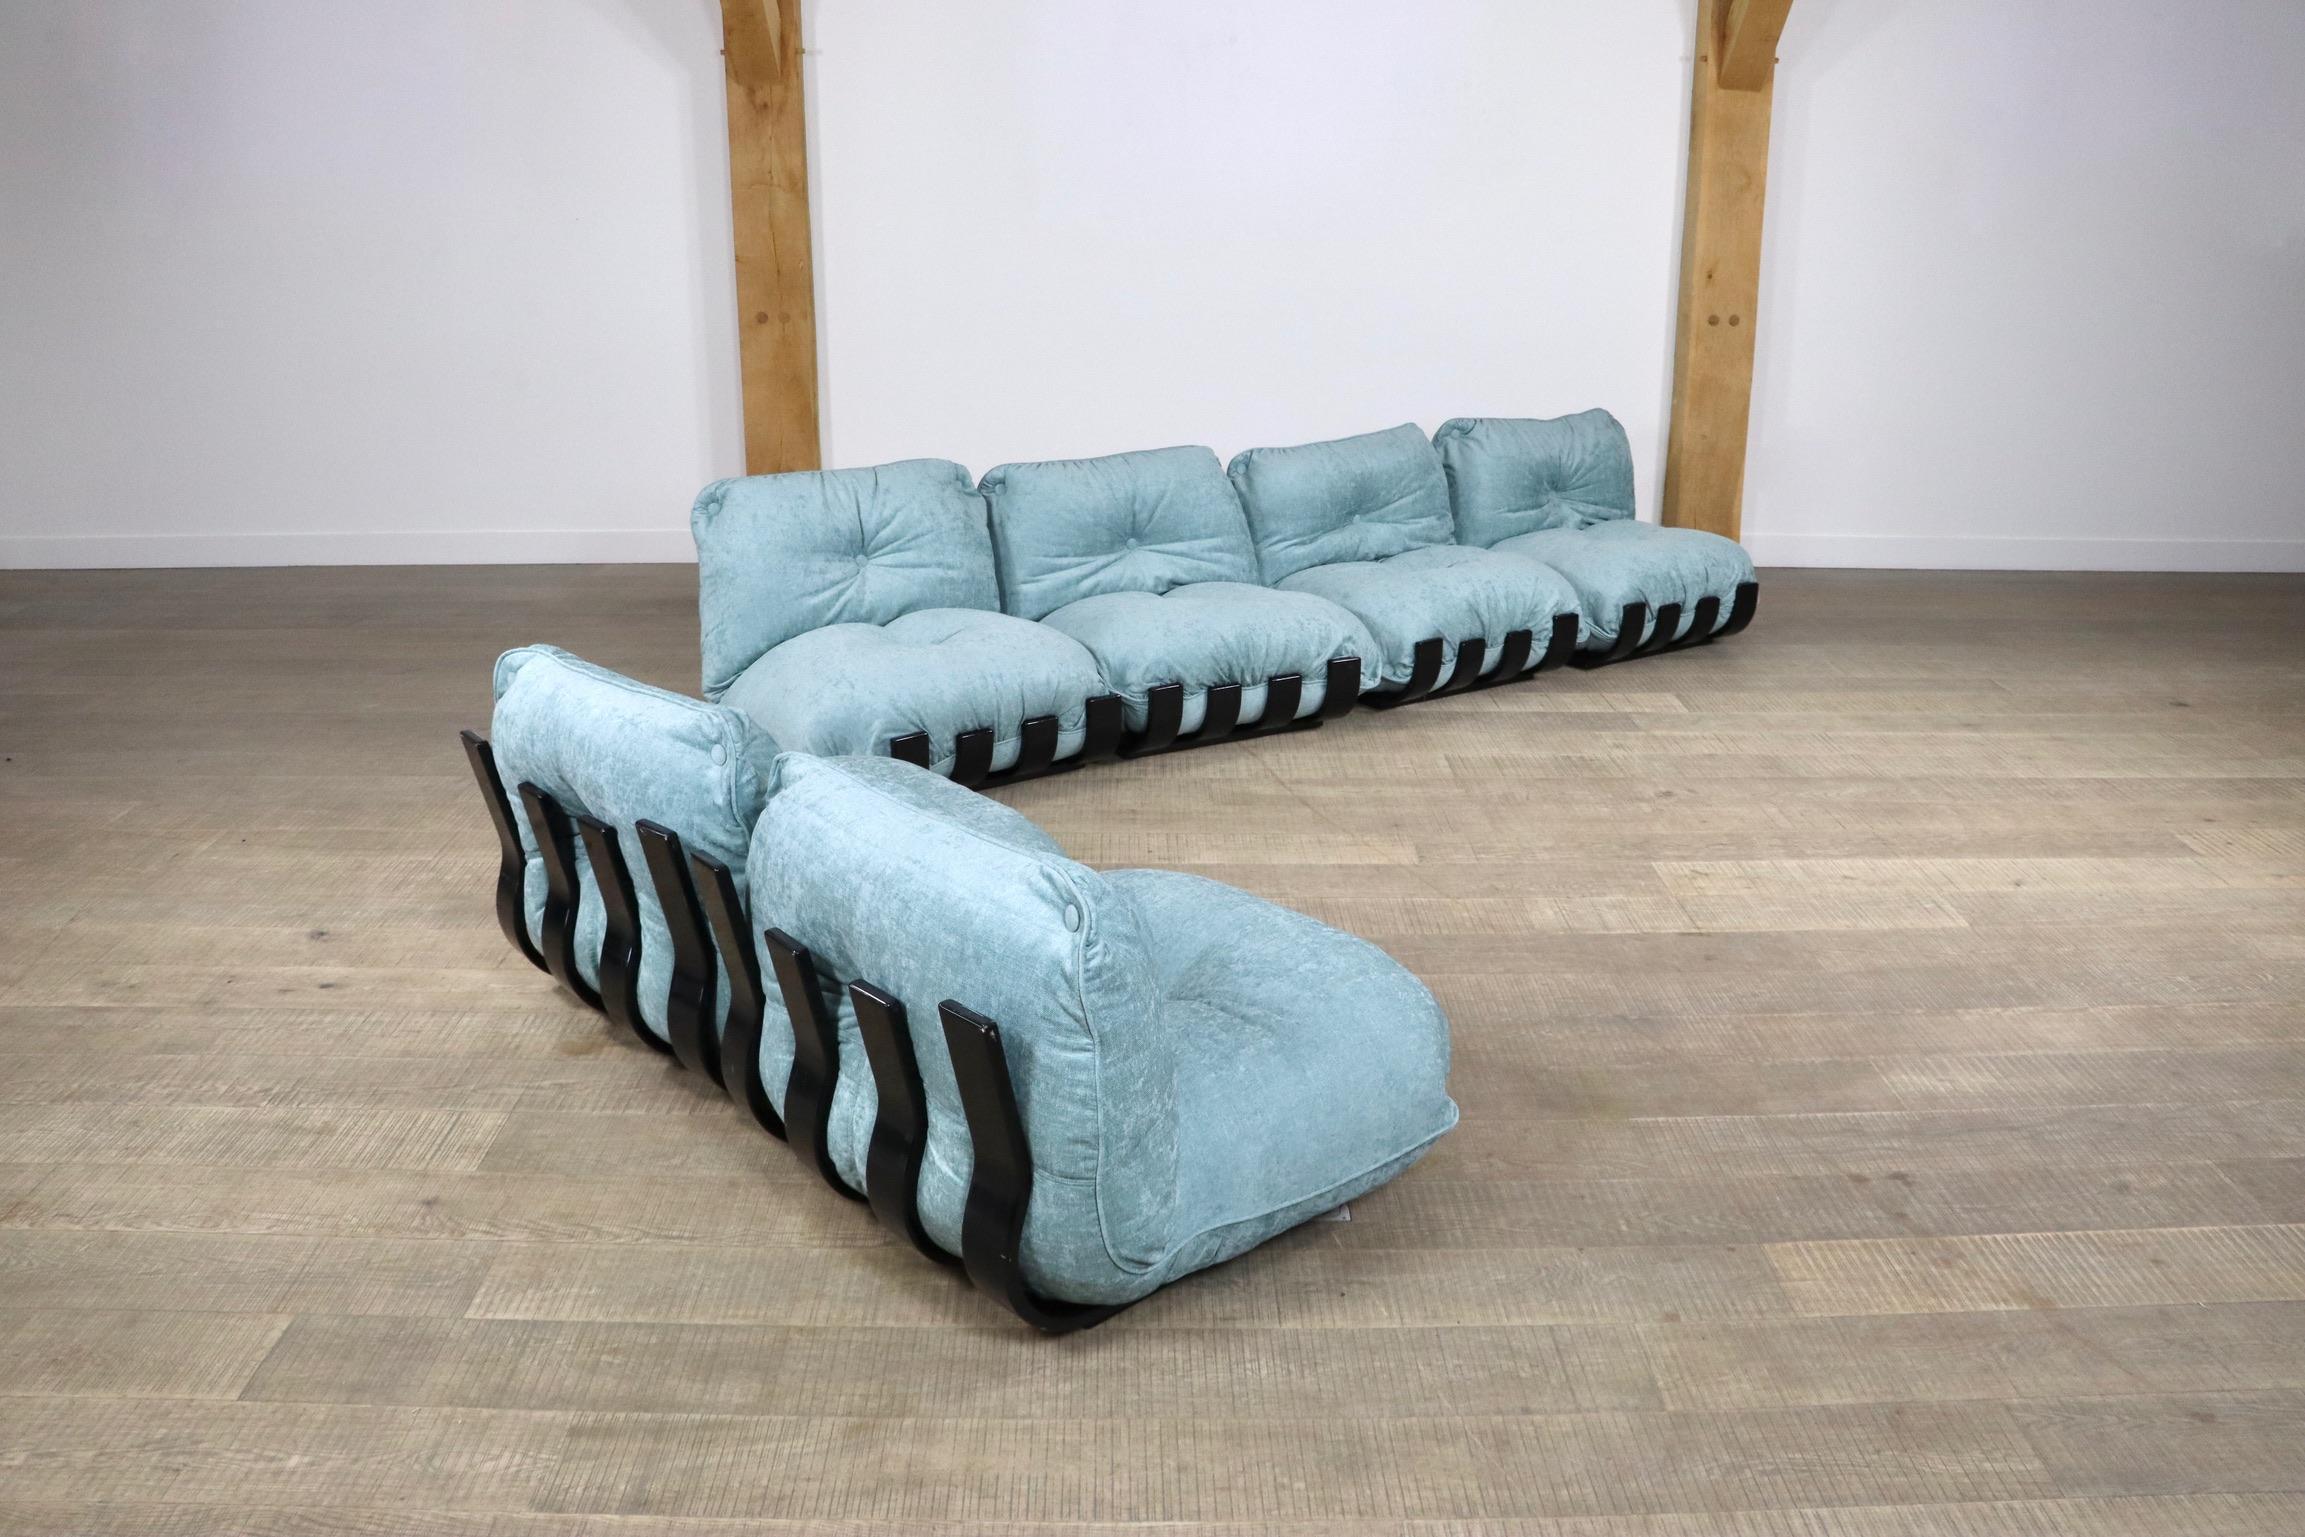 Mid-20th Century Sectional Gran Visir Sofa in Blue Velvet by Luciano Frigerio, Italy, 1970s